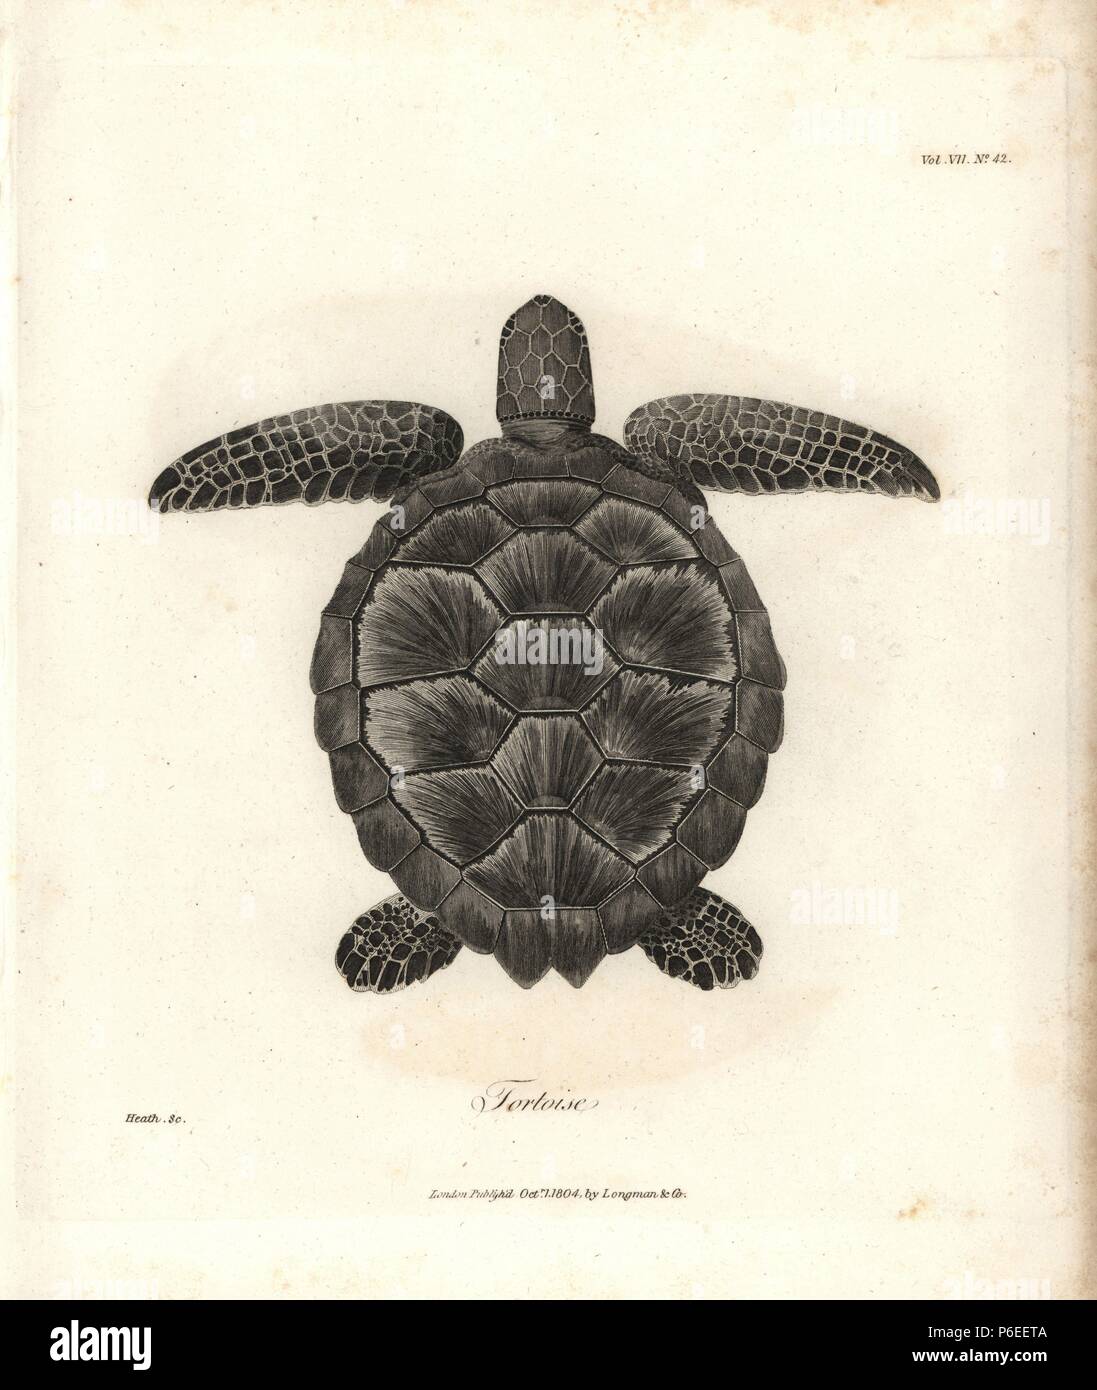 Caretta or hawksbill sea turtle, Eretmochelys imbricata. Critically endangered. Copperplate engraving from James Bruce's 'Travels to Discover the Source of the Nile, in the years 1768, 1769, 1770, 1771, 1772 and 1773,' London, 1790. James Bruce (1730-1794) was a Scottish explorer and travel writer who spent more than 12 years in North Africa and Ethiopia. Engraved by Heath after an original drawing by Bruce. Stock Photo